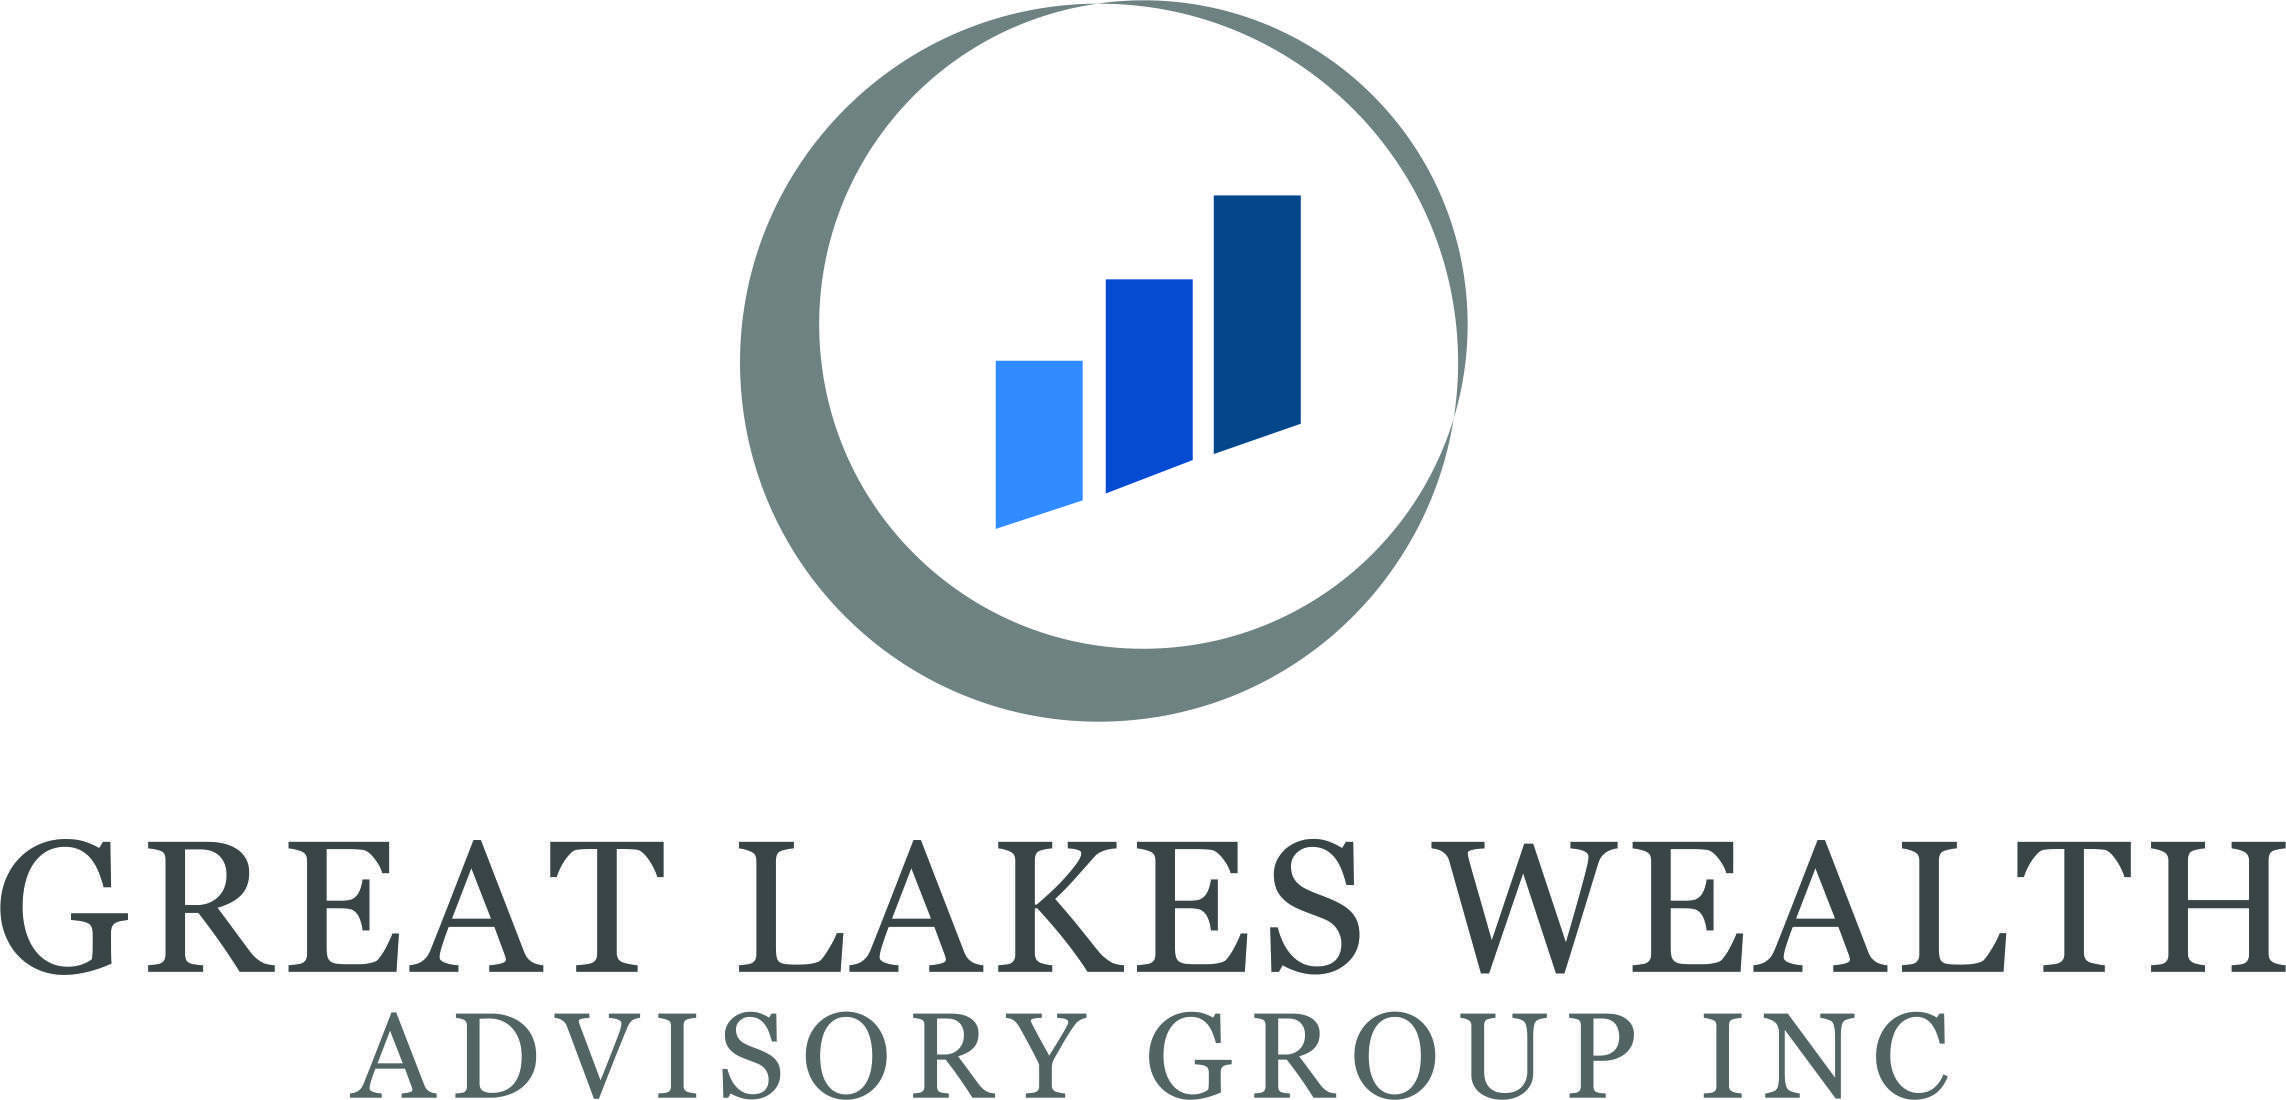 Great Lakes Wealth Management Advisory Group